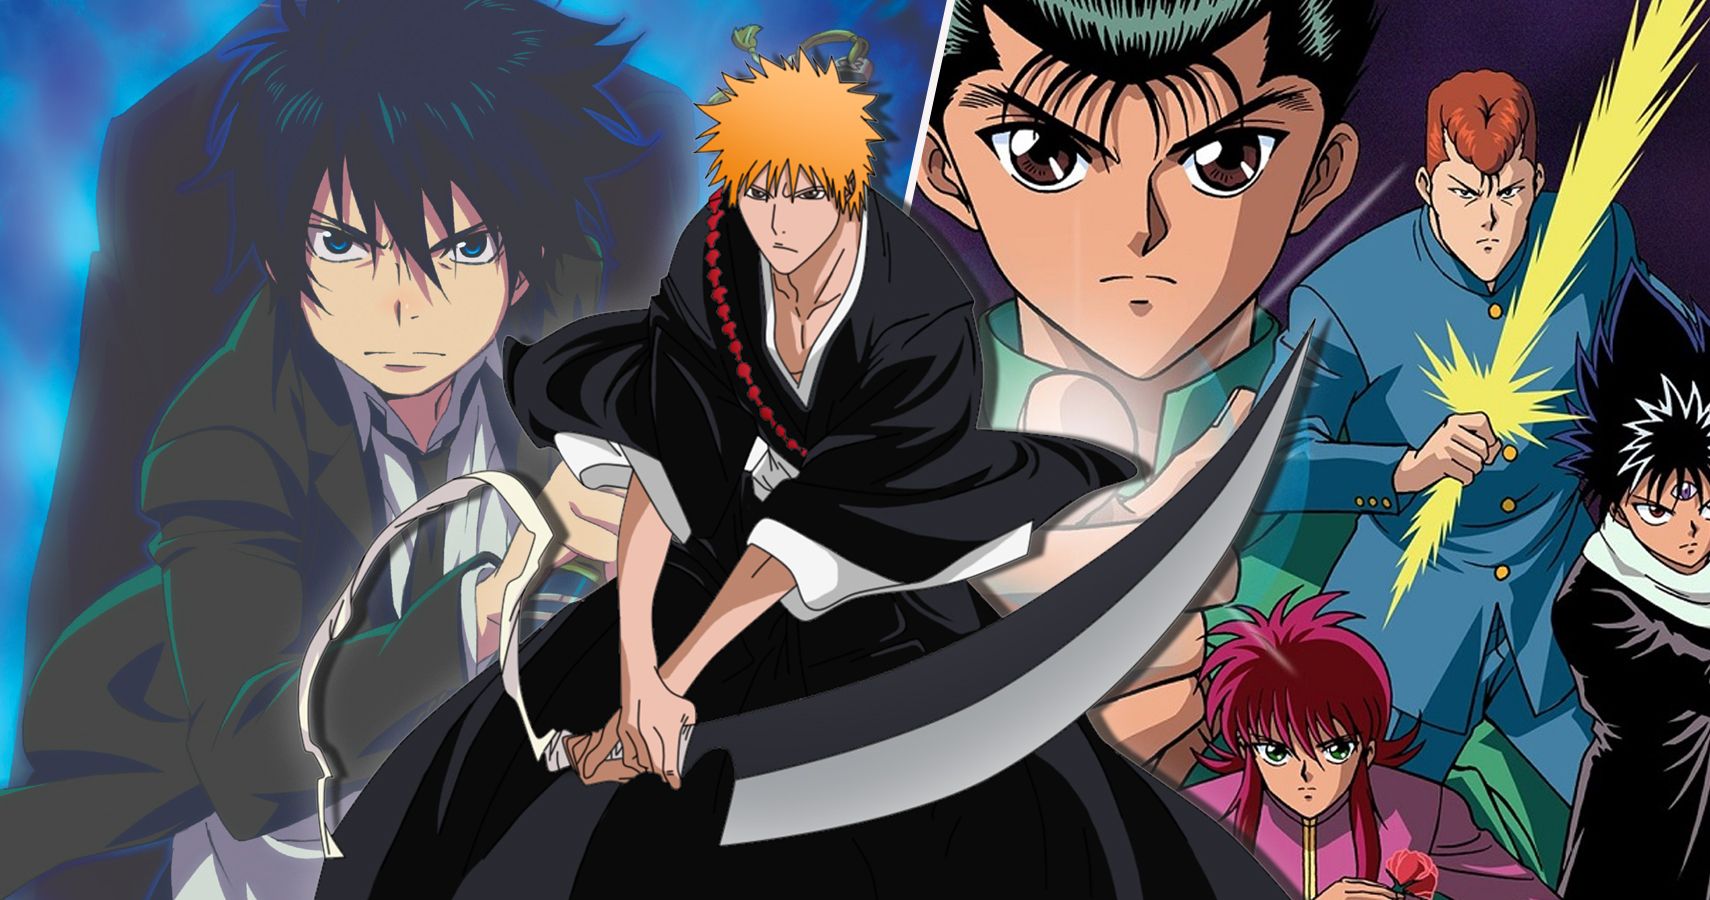 cbr.com - Tite Kubo's Bleach is a manga and anime series that&...